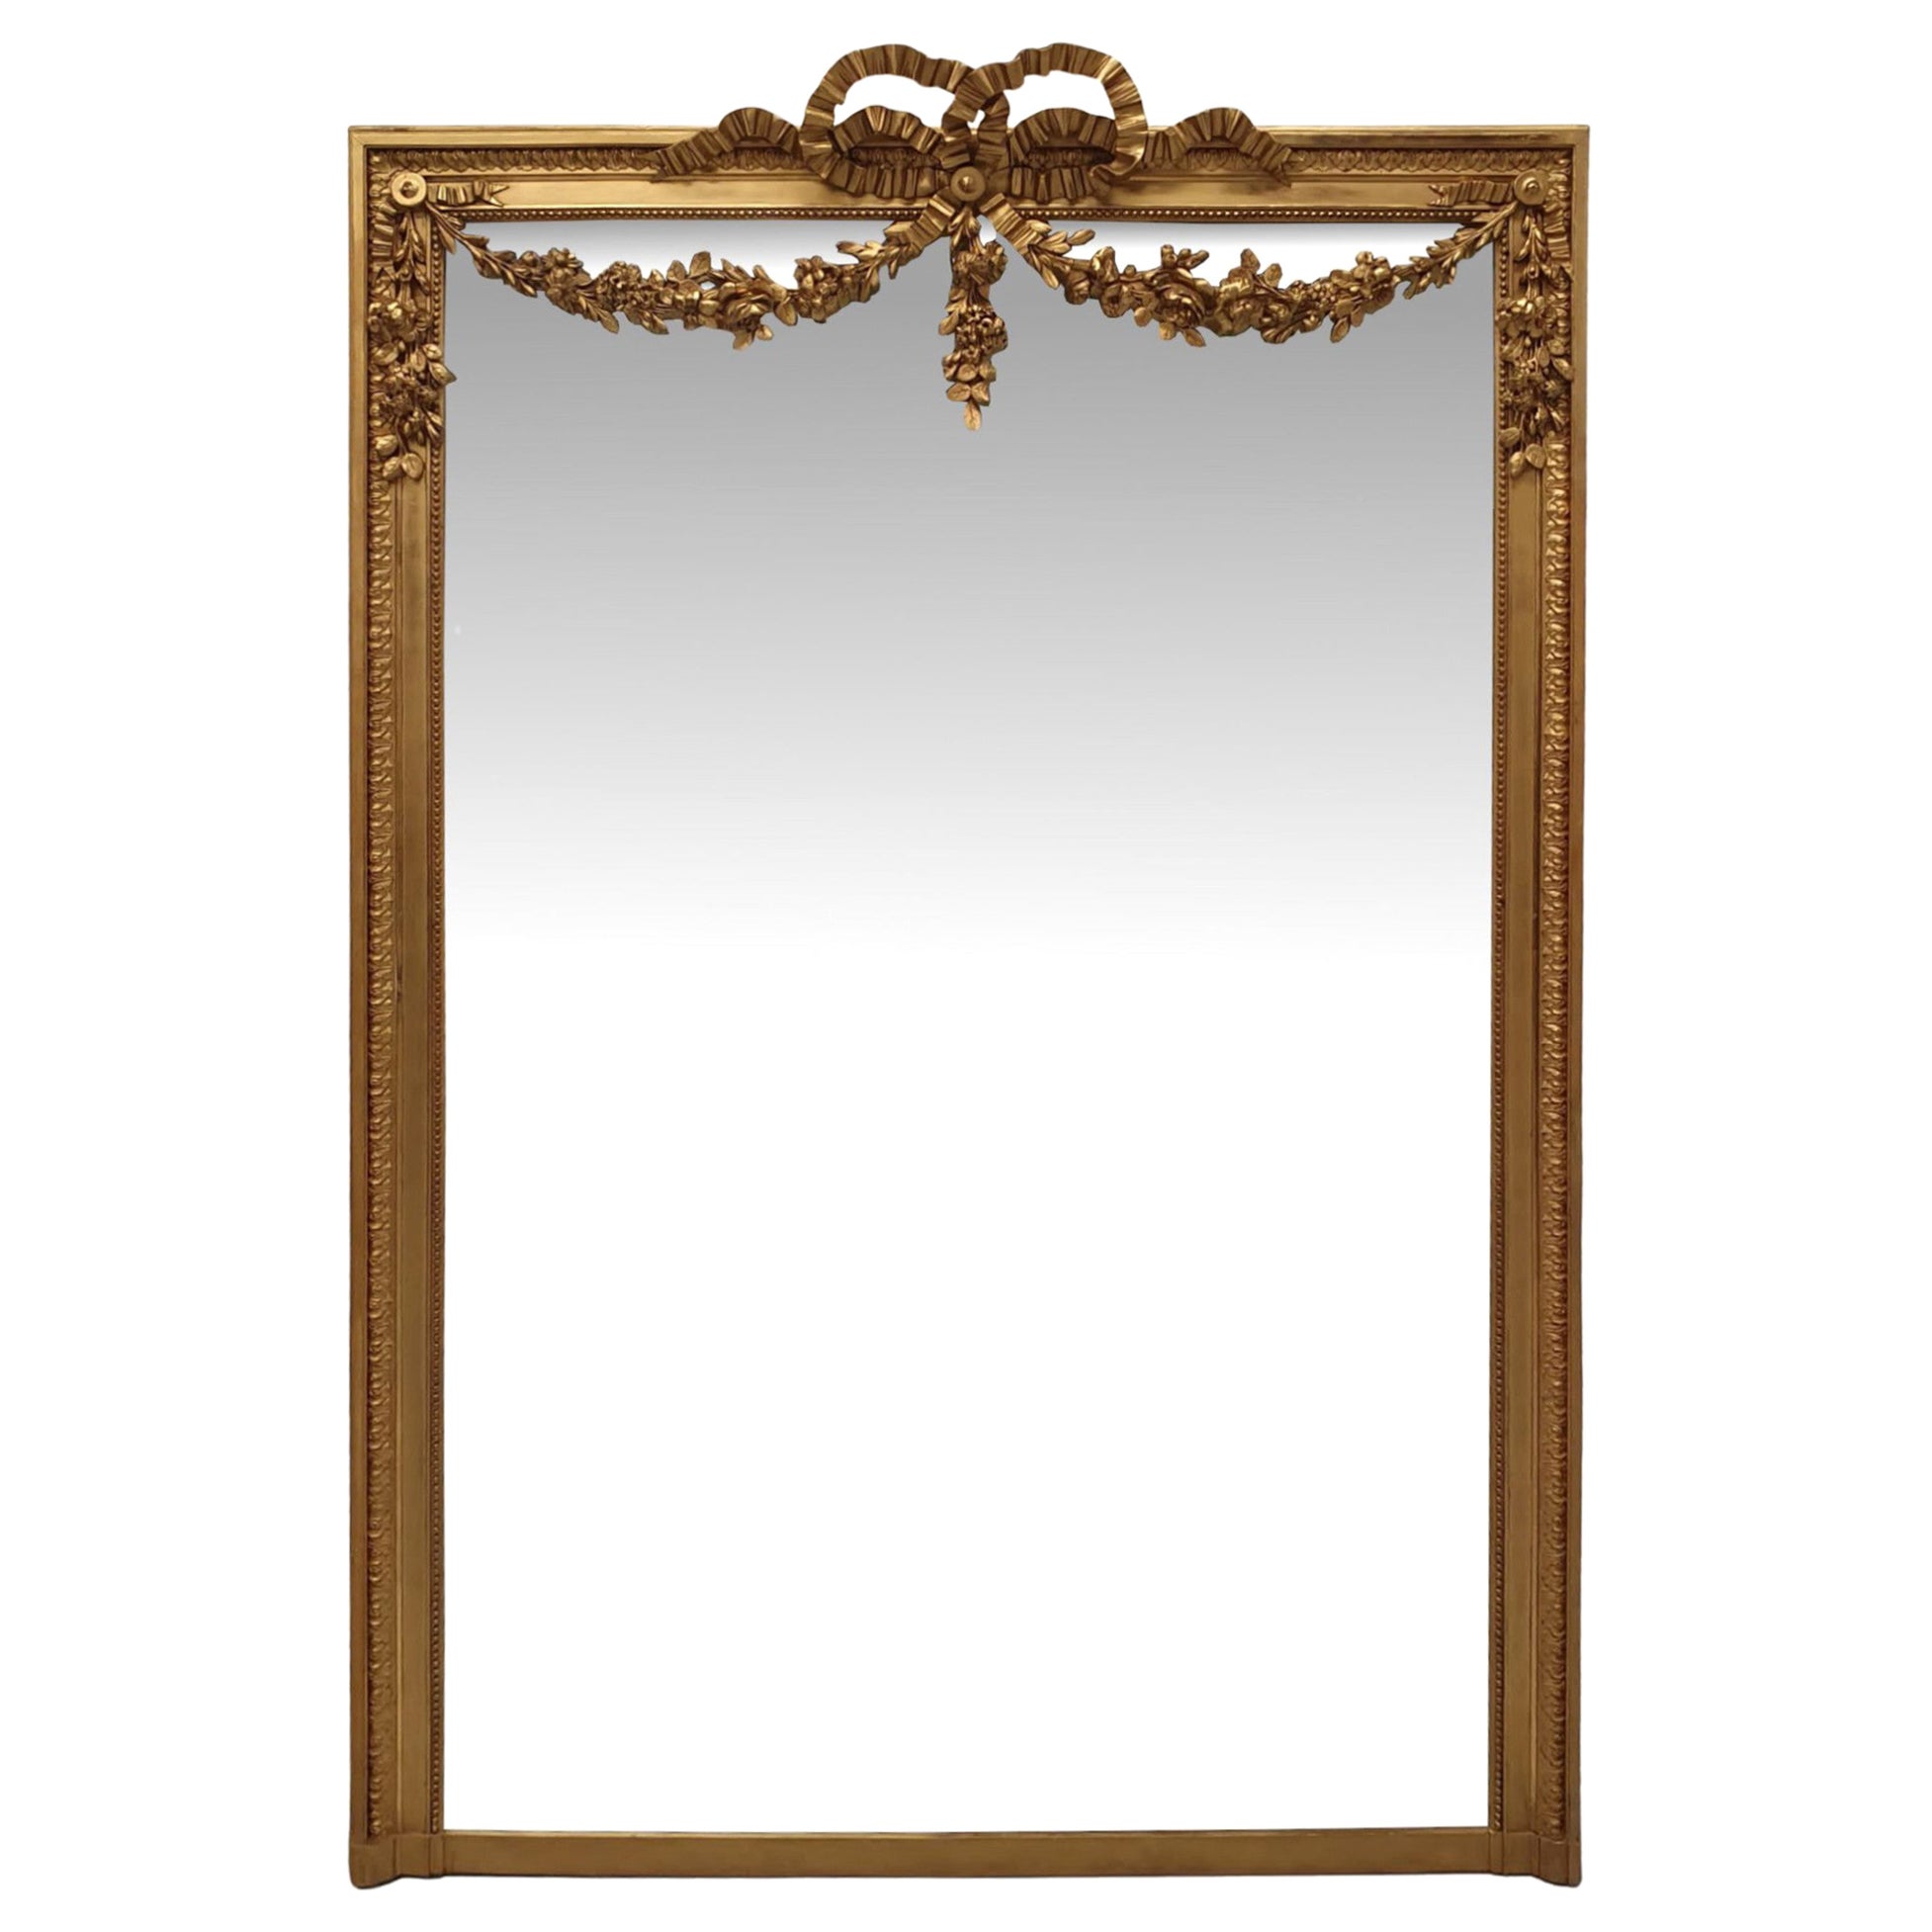 Very Fine Large Giltwood Overmantle Mirror